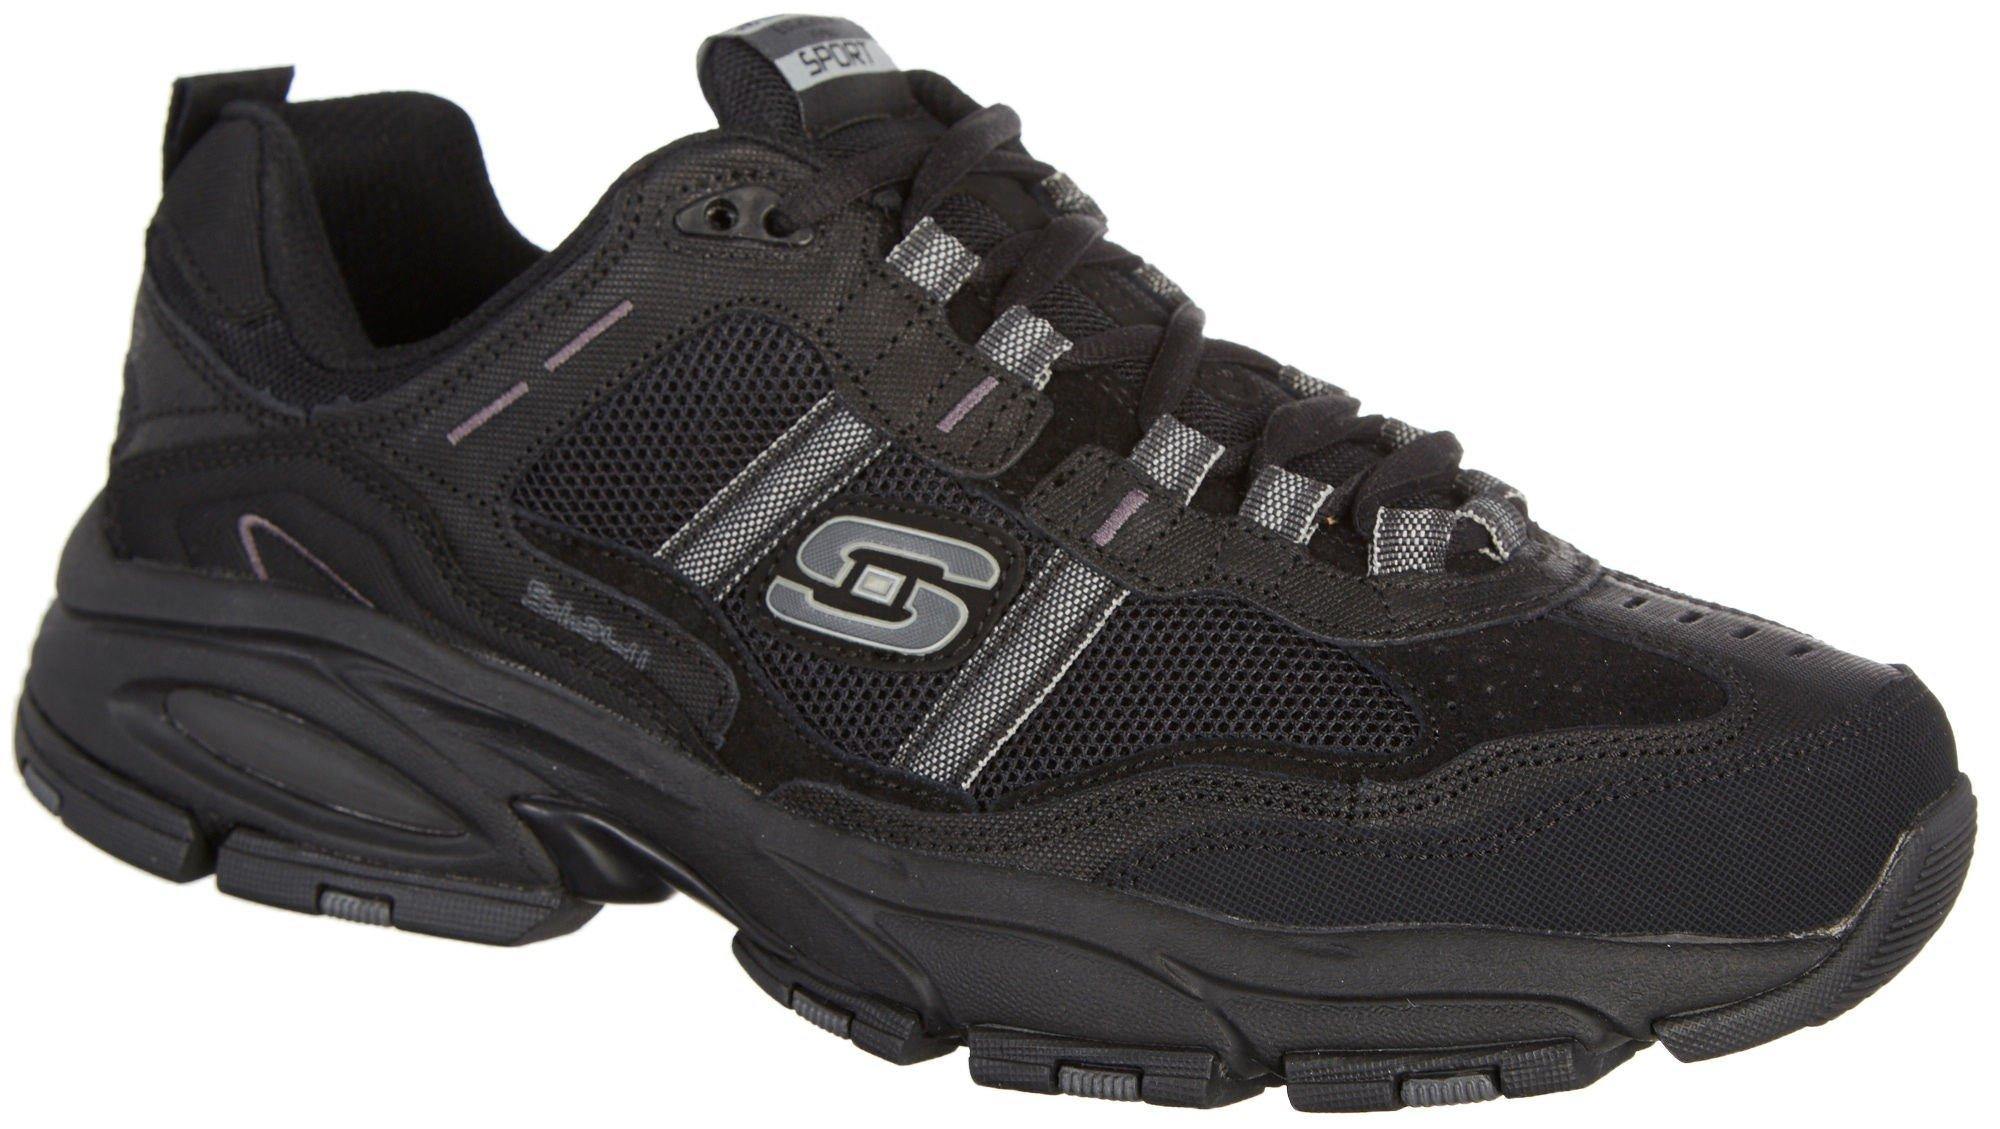 Men's Running Shoes | Sneakers & Athletic Shoes | Bealls Florida